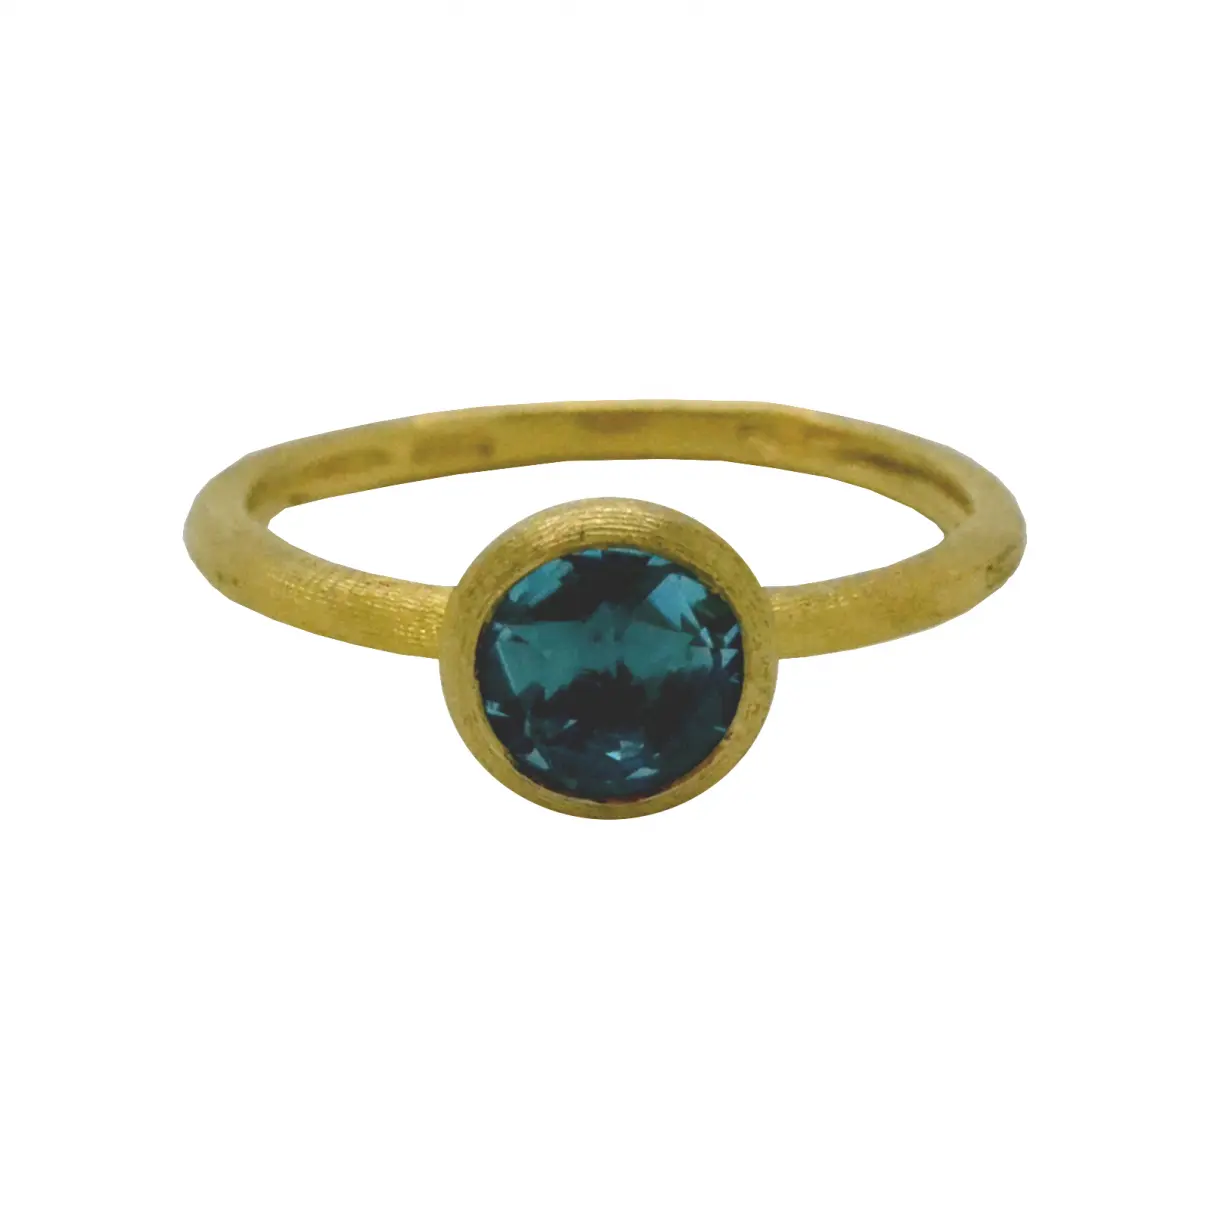 Buy Marco Bicego Yellow gold ring online